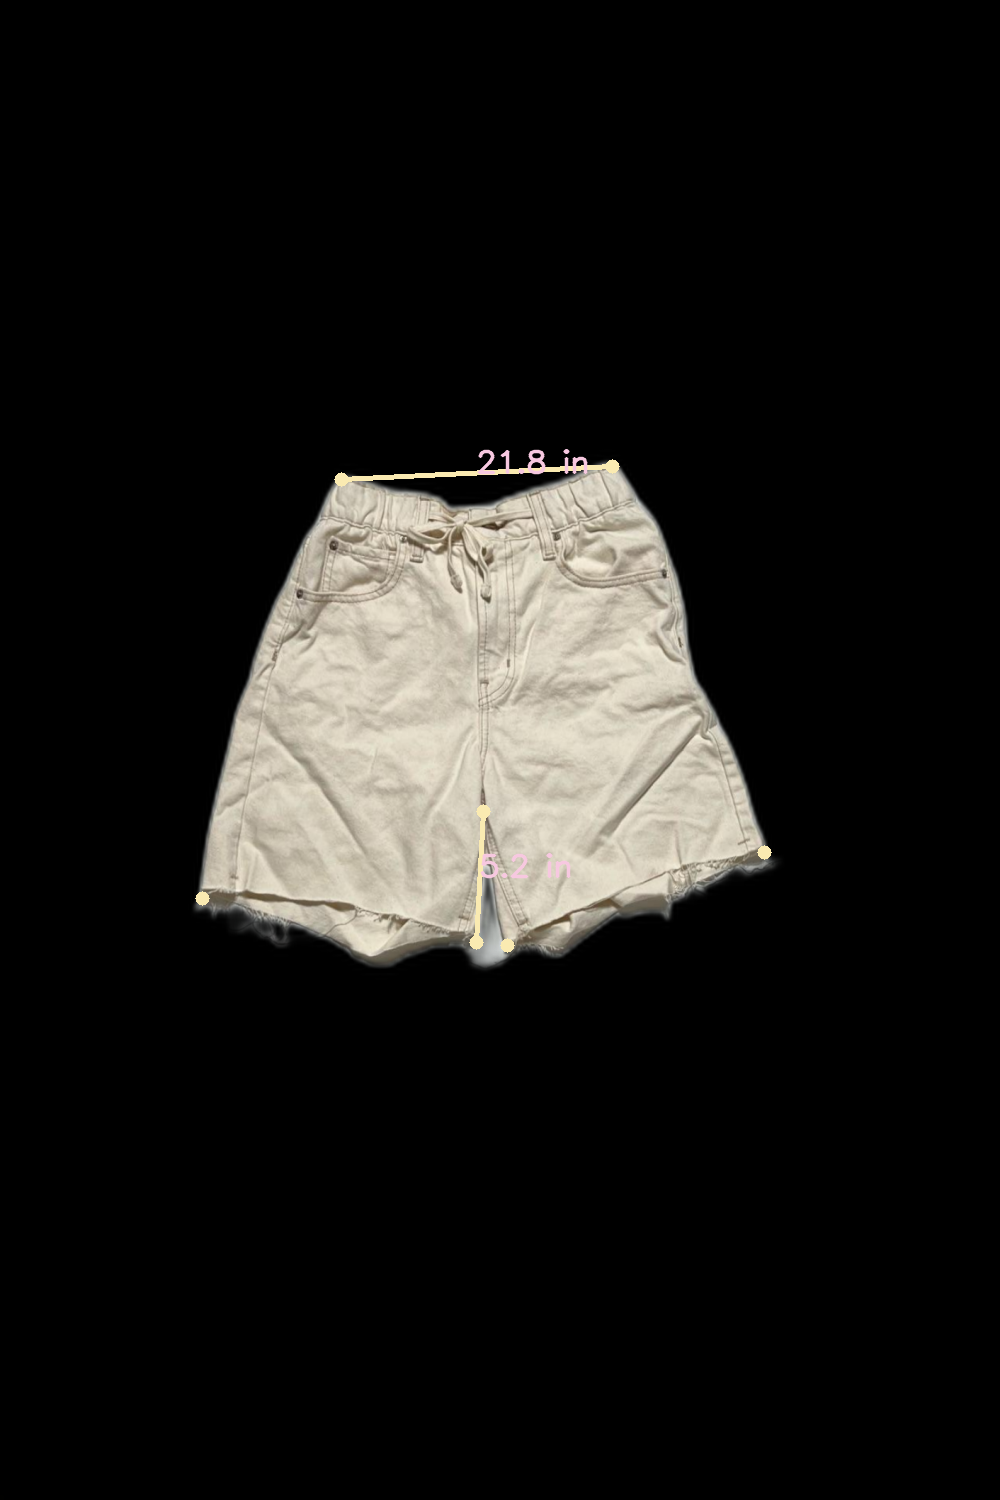 BDG - Beige Baggy Pull On Shorts